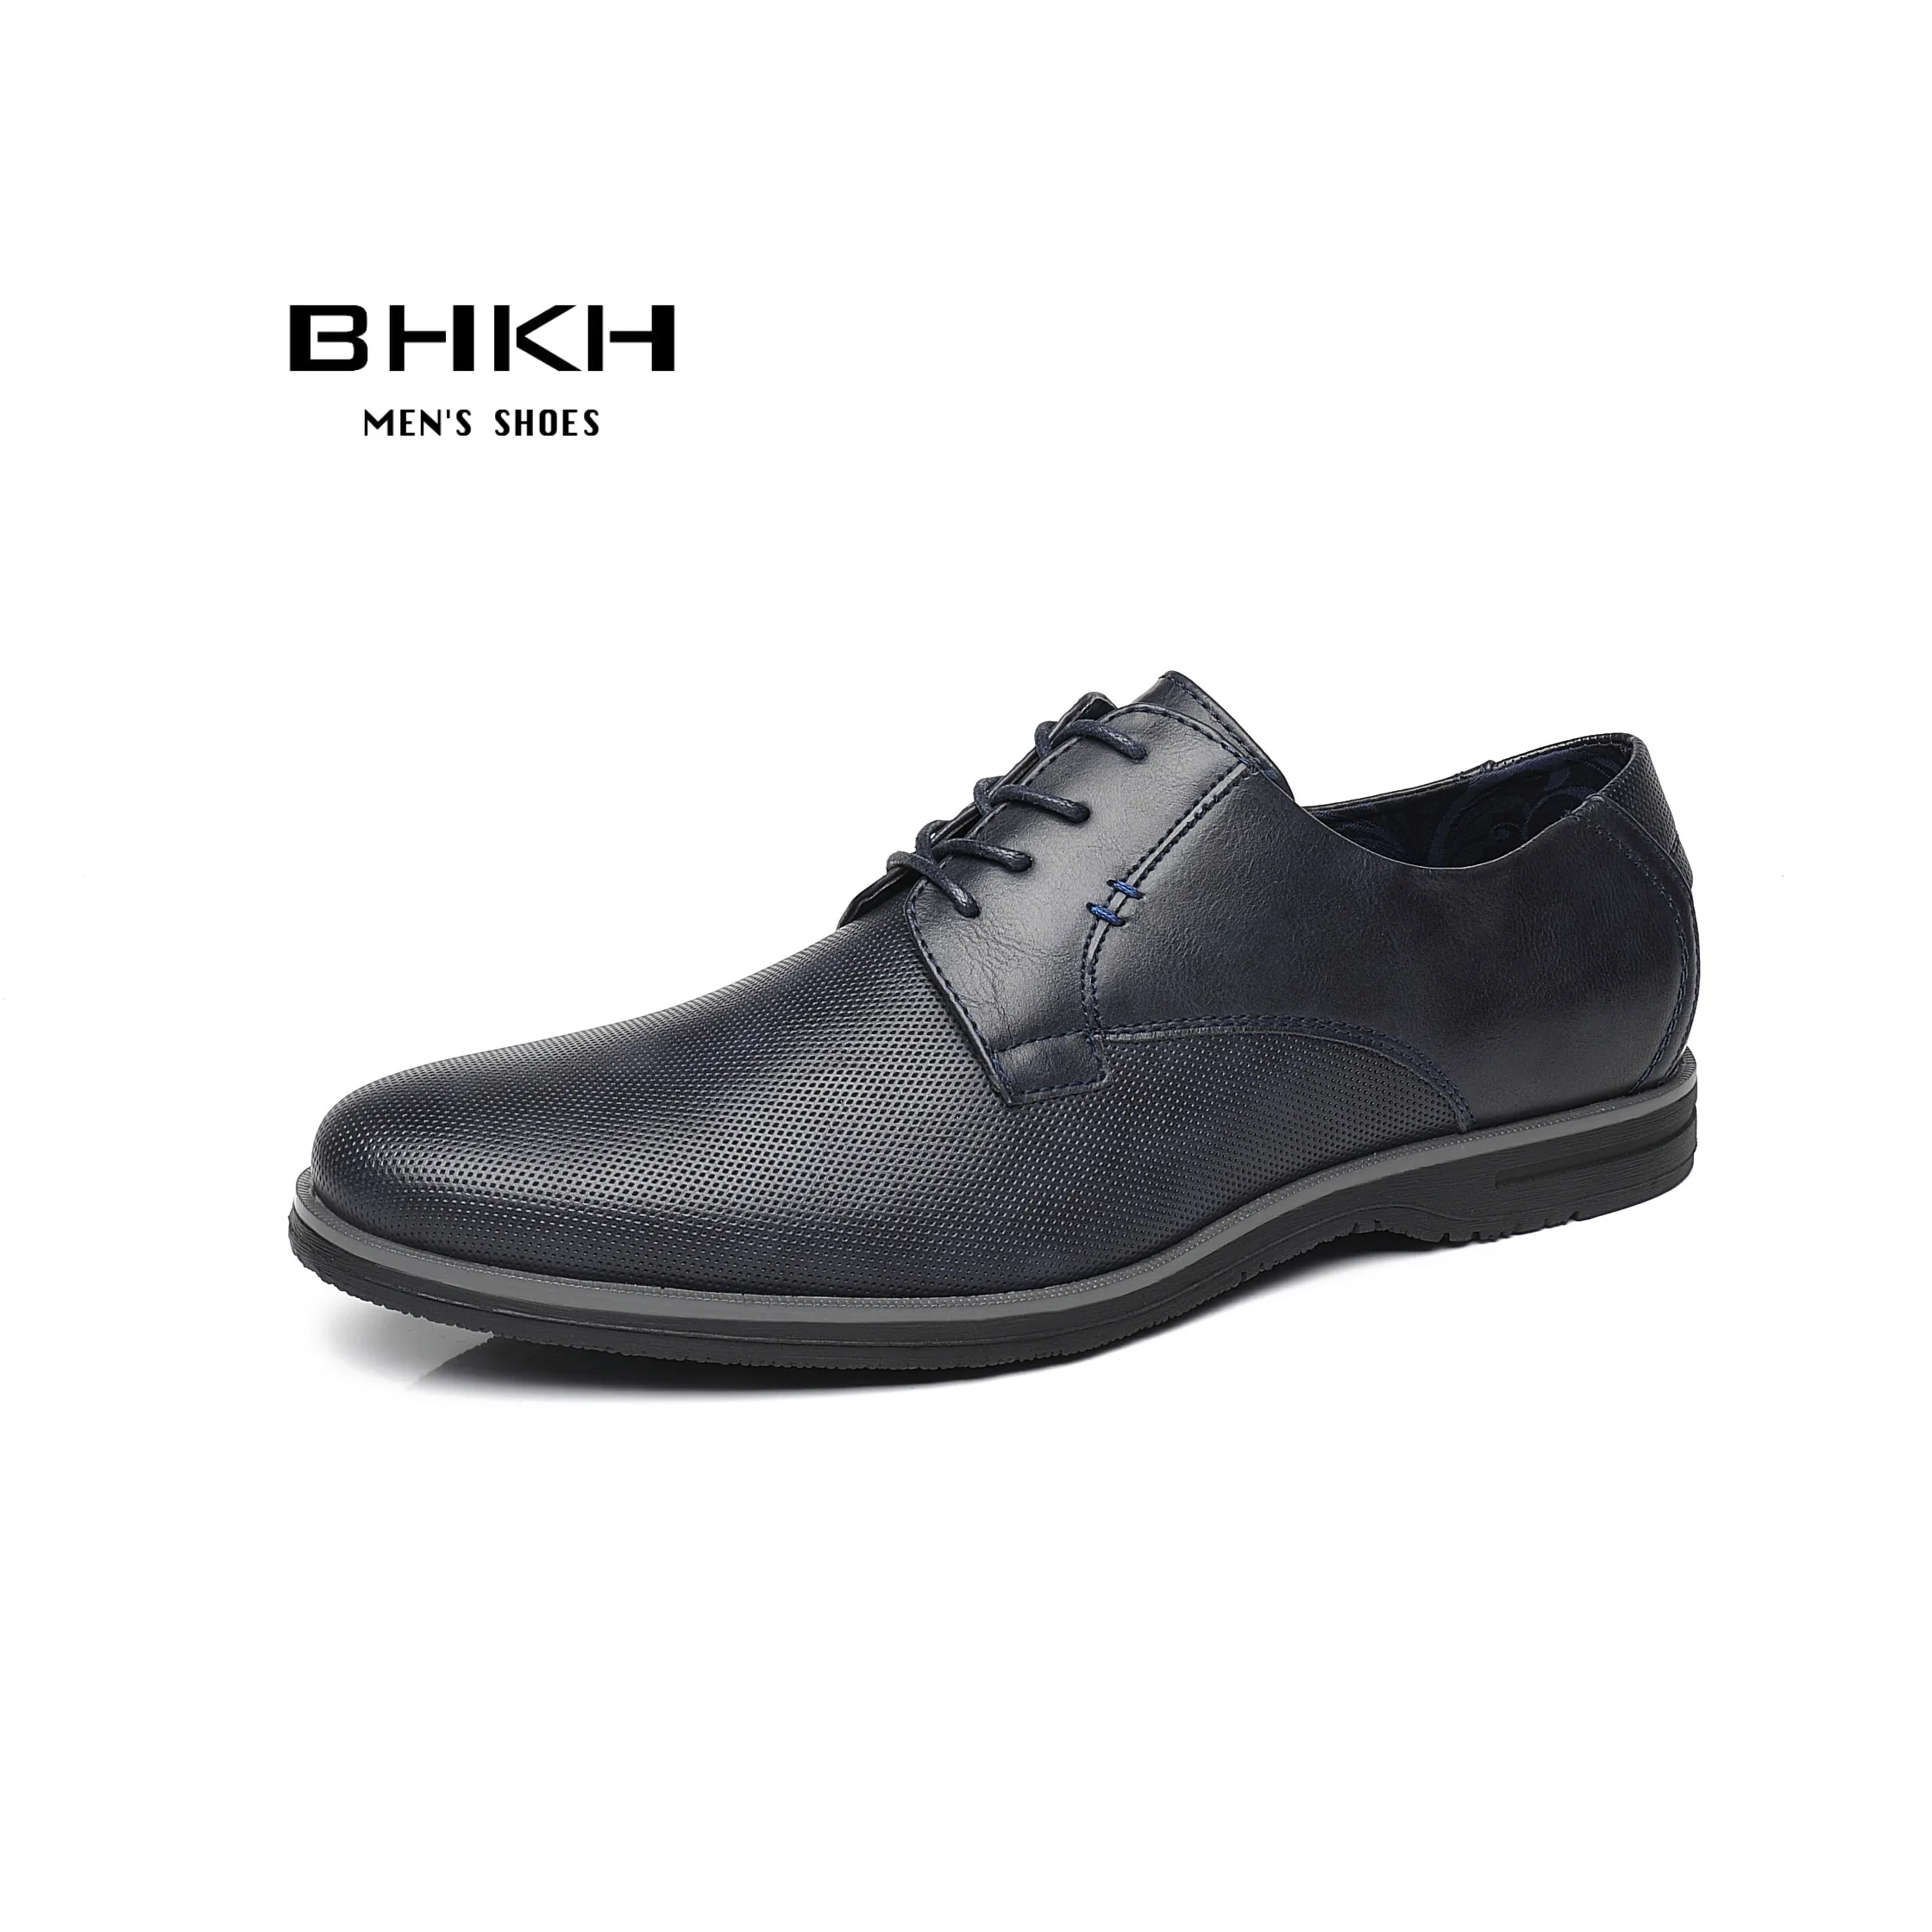 Leather men casual shoes business work office lace up dress shoes lightweight men shoes thumb200